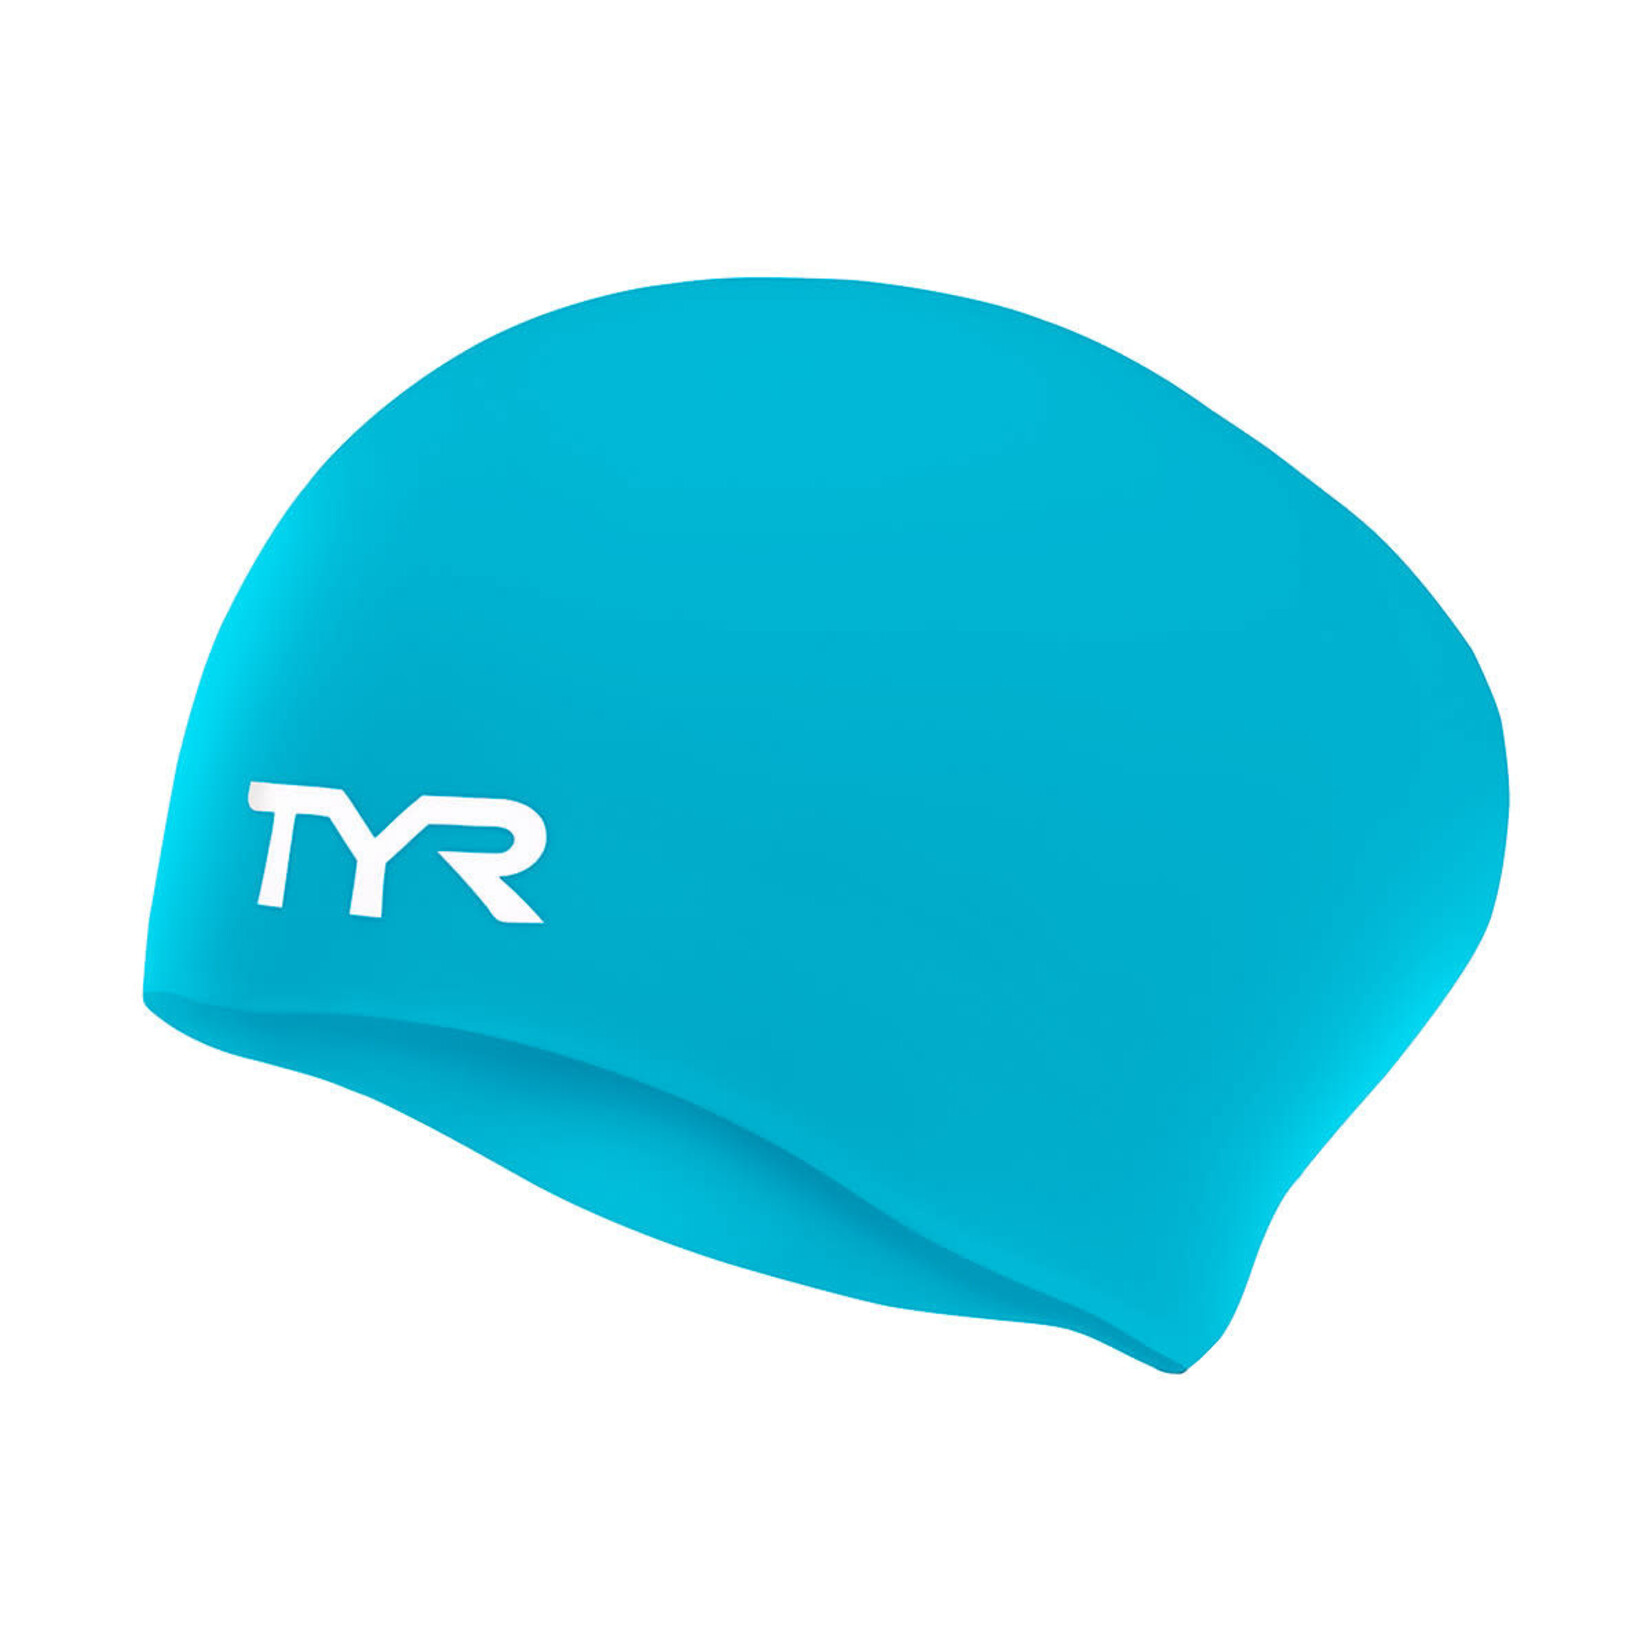 TYR TYR ADULT LONG HAIR SILICONE WRINKLE-FREE SWIM CAP - LIMITED EDITION POOL